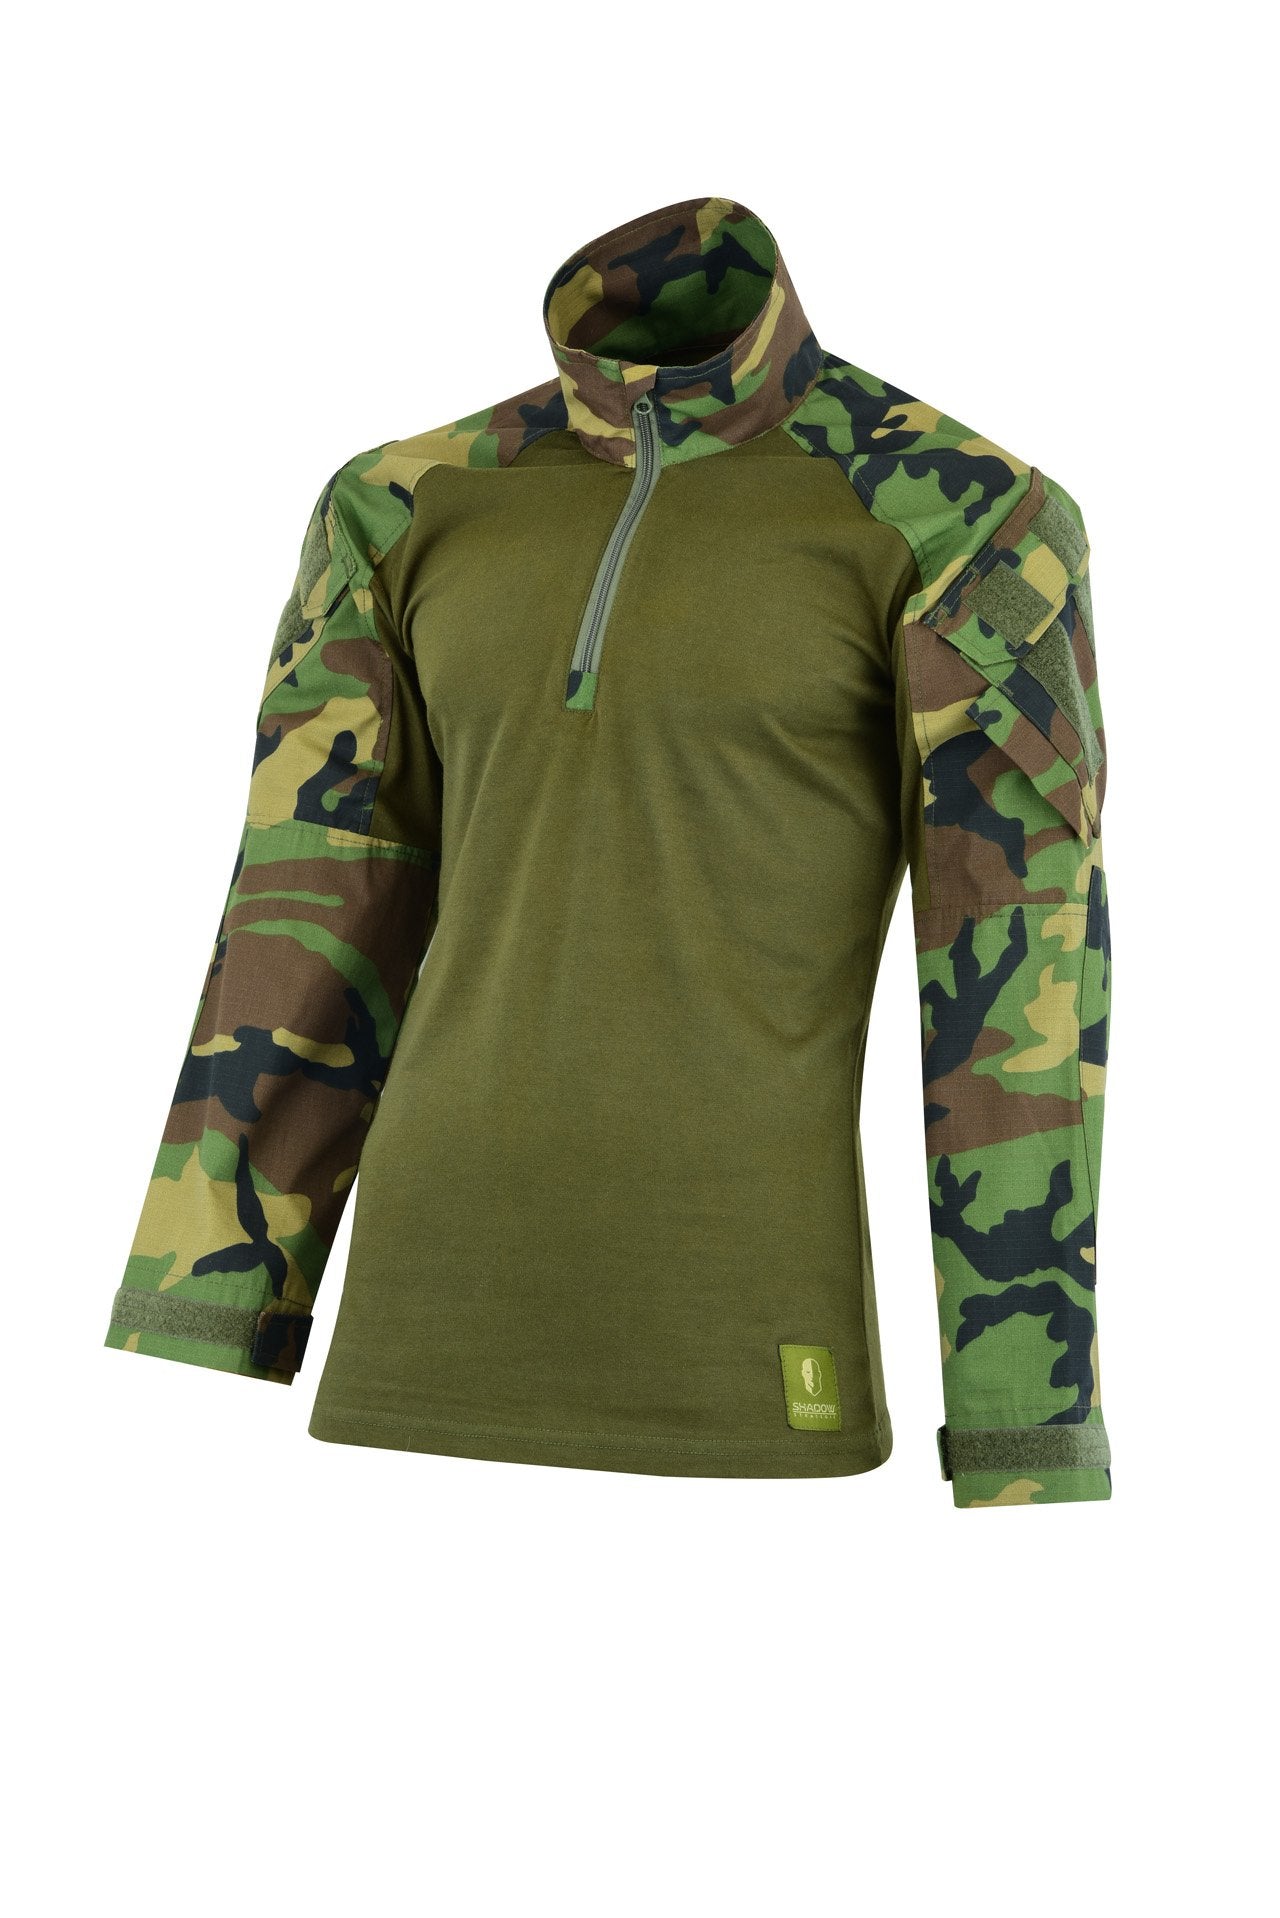 Tactical Zone HYBRID TACTICAL SHIRT IS A PERFECT COMBAT SHIRT Colour  Woodland Camo Front